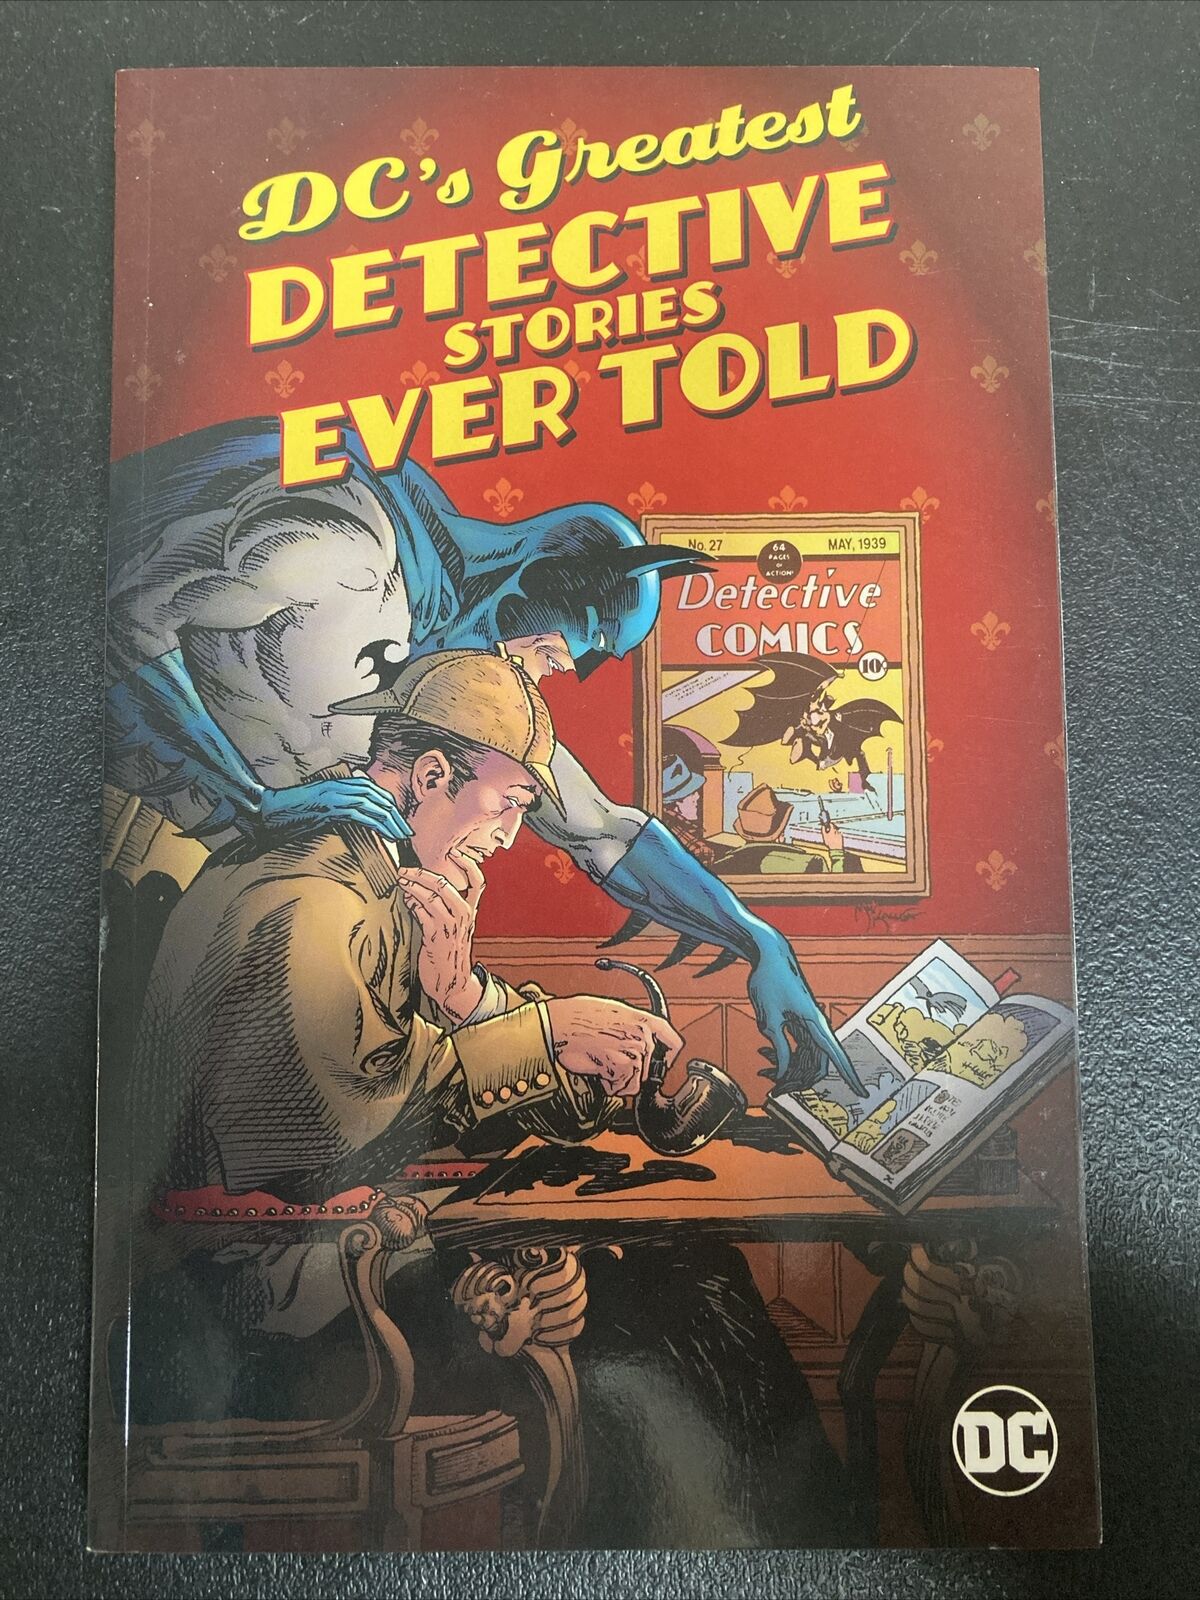 DC’s Greatest Detective Stories Ever Told TPB